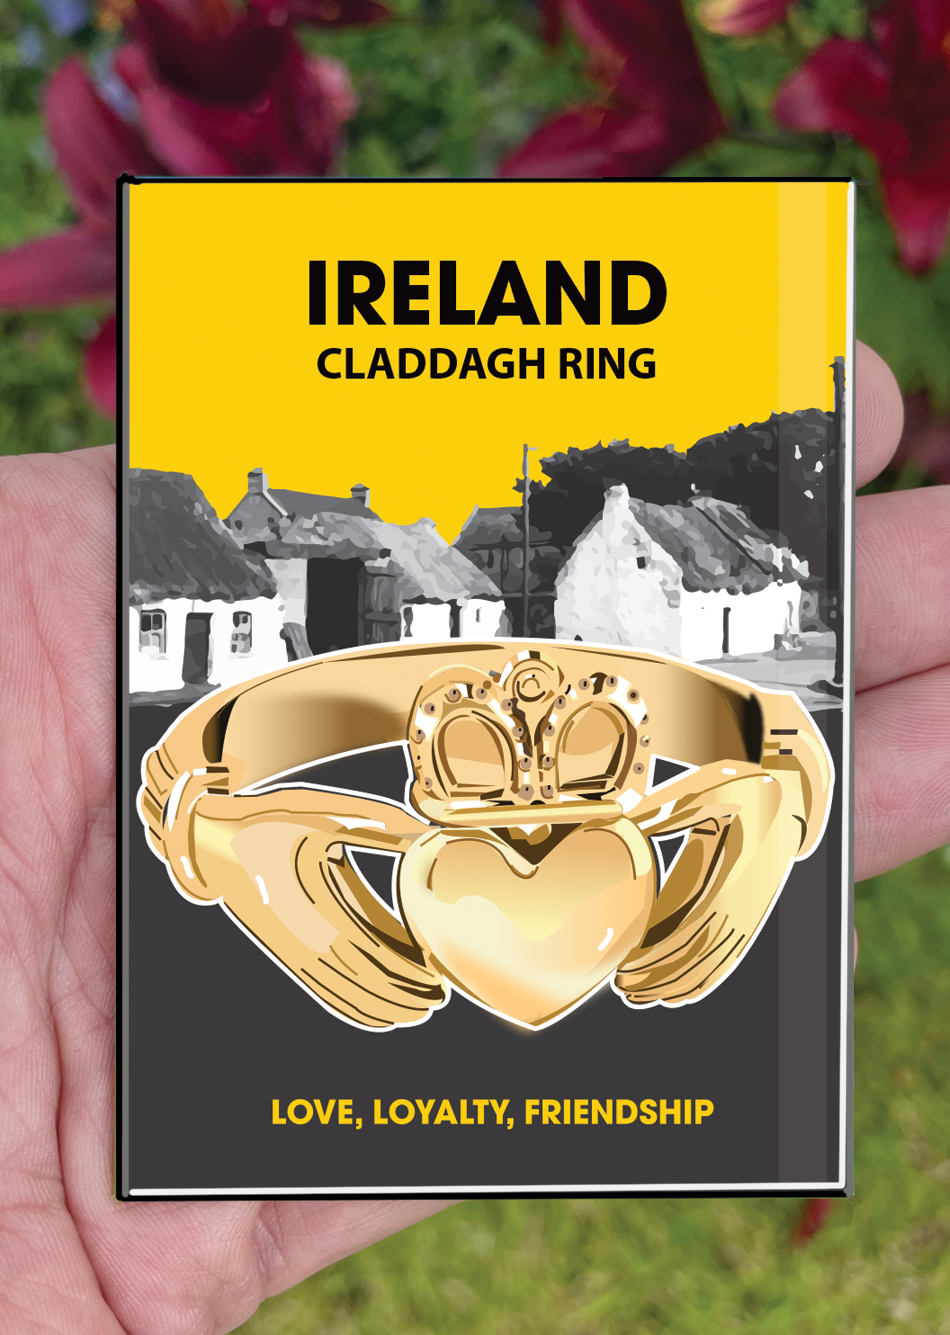 Galway Postcard or A4 Mounted Print or Fridge Magnet  - Claddagh Ring with QR CODE Link